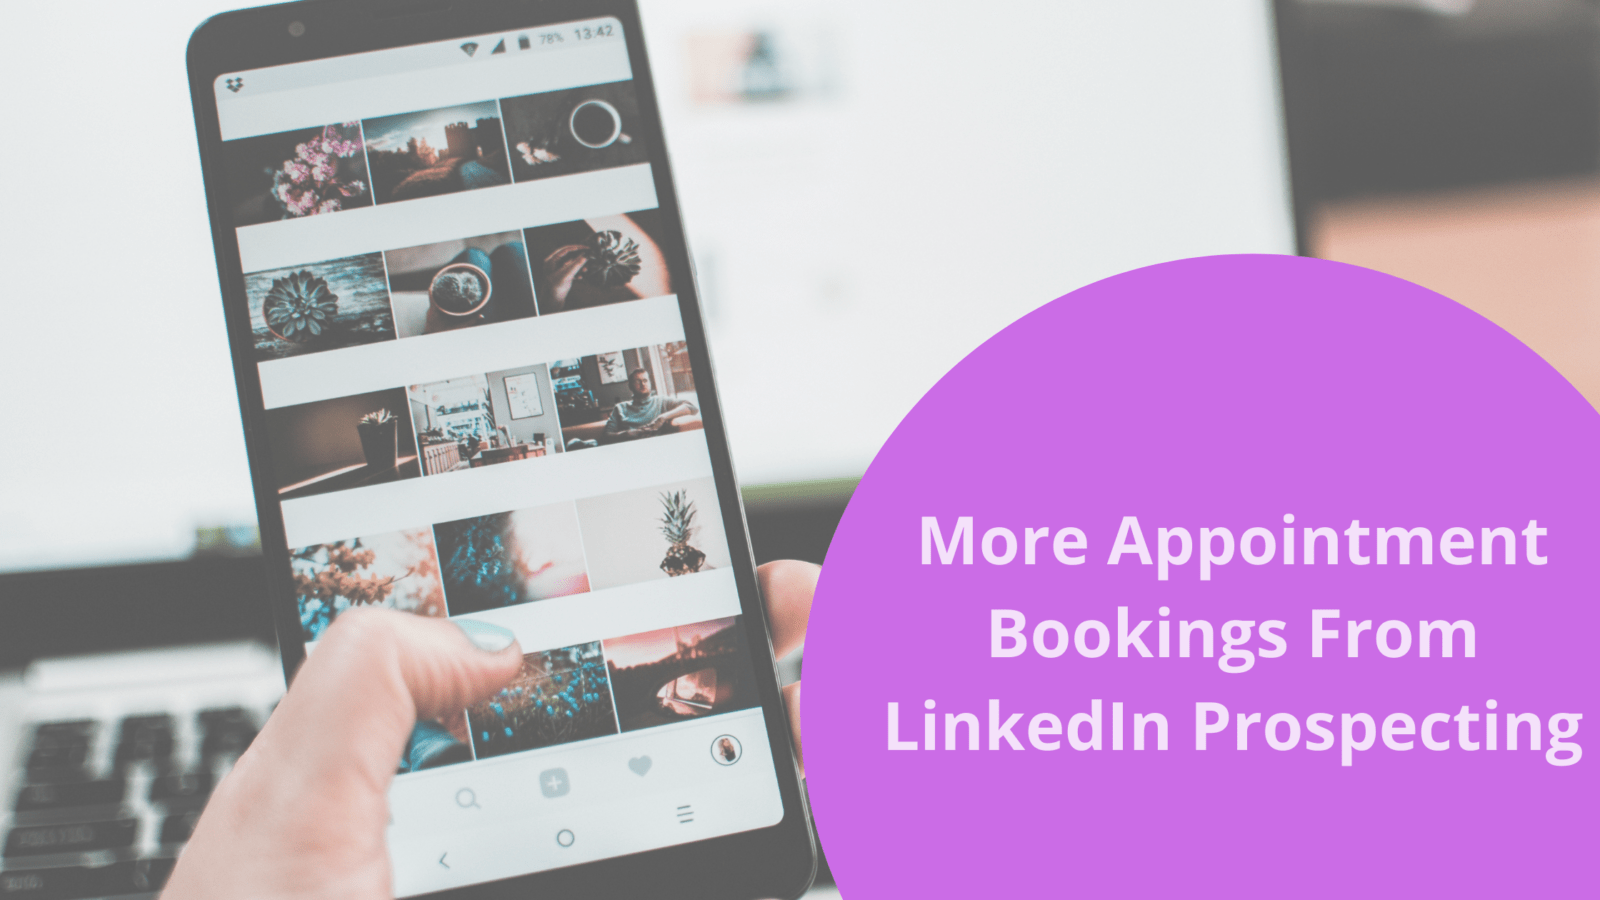 How to get more appointment bookings from linkedin prospecting? | bookafy